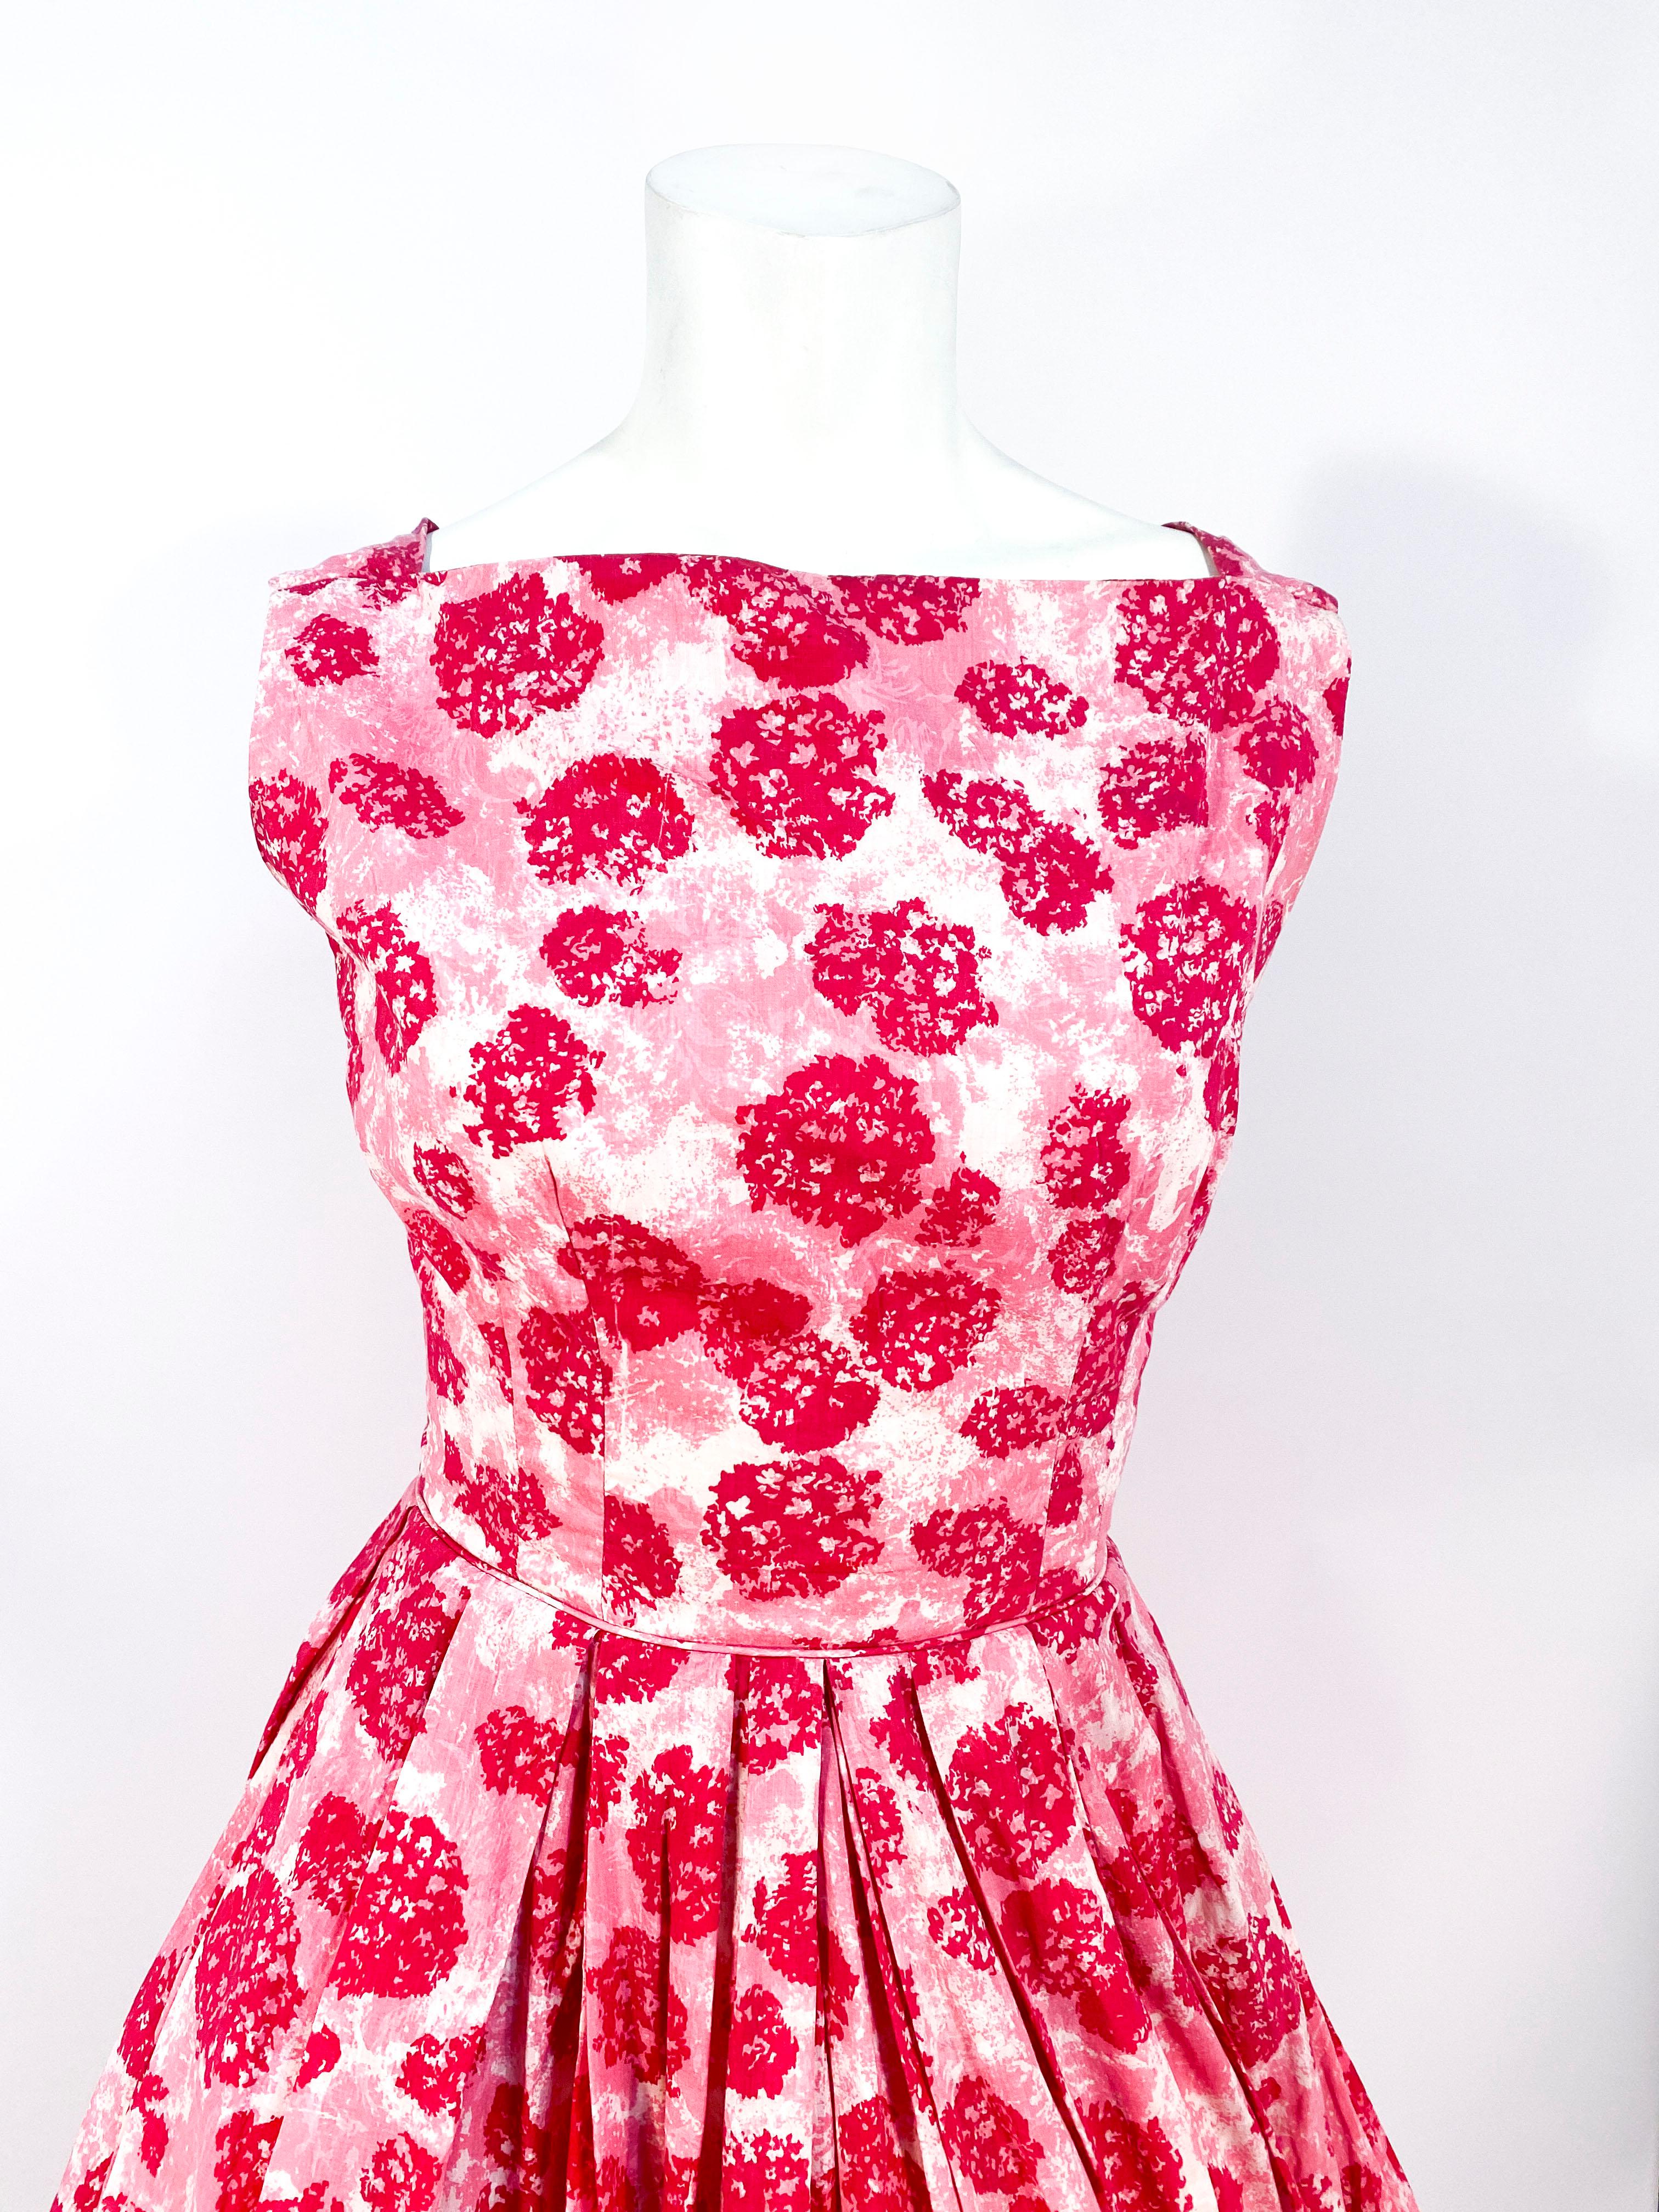 Late 1950s to early 1960s cotton day dress featuring an abstract floral print in several shades of pink. The structure of this dress has a full skirt, high neckline, and piped waist. The back of the dress has a gathered neckline, hidden zipper, and